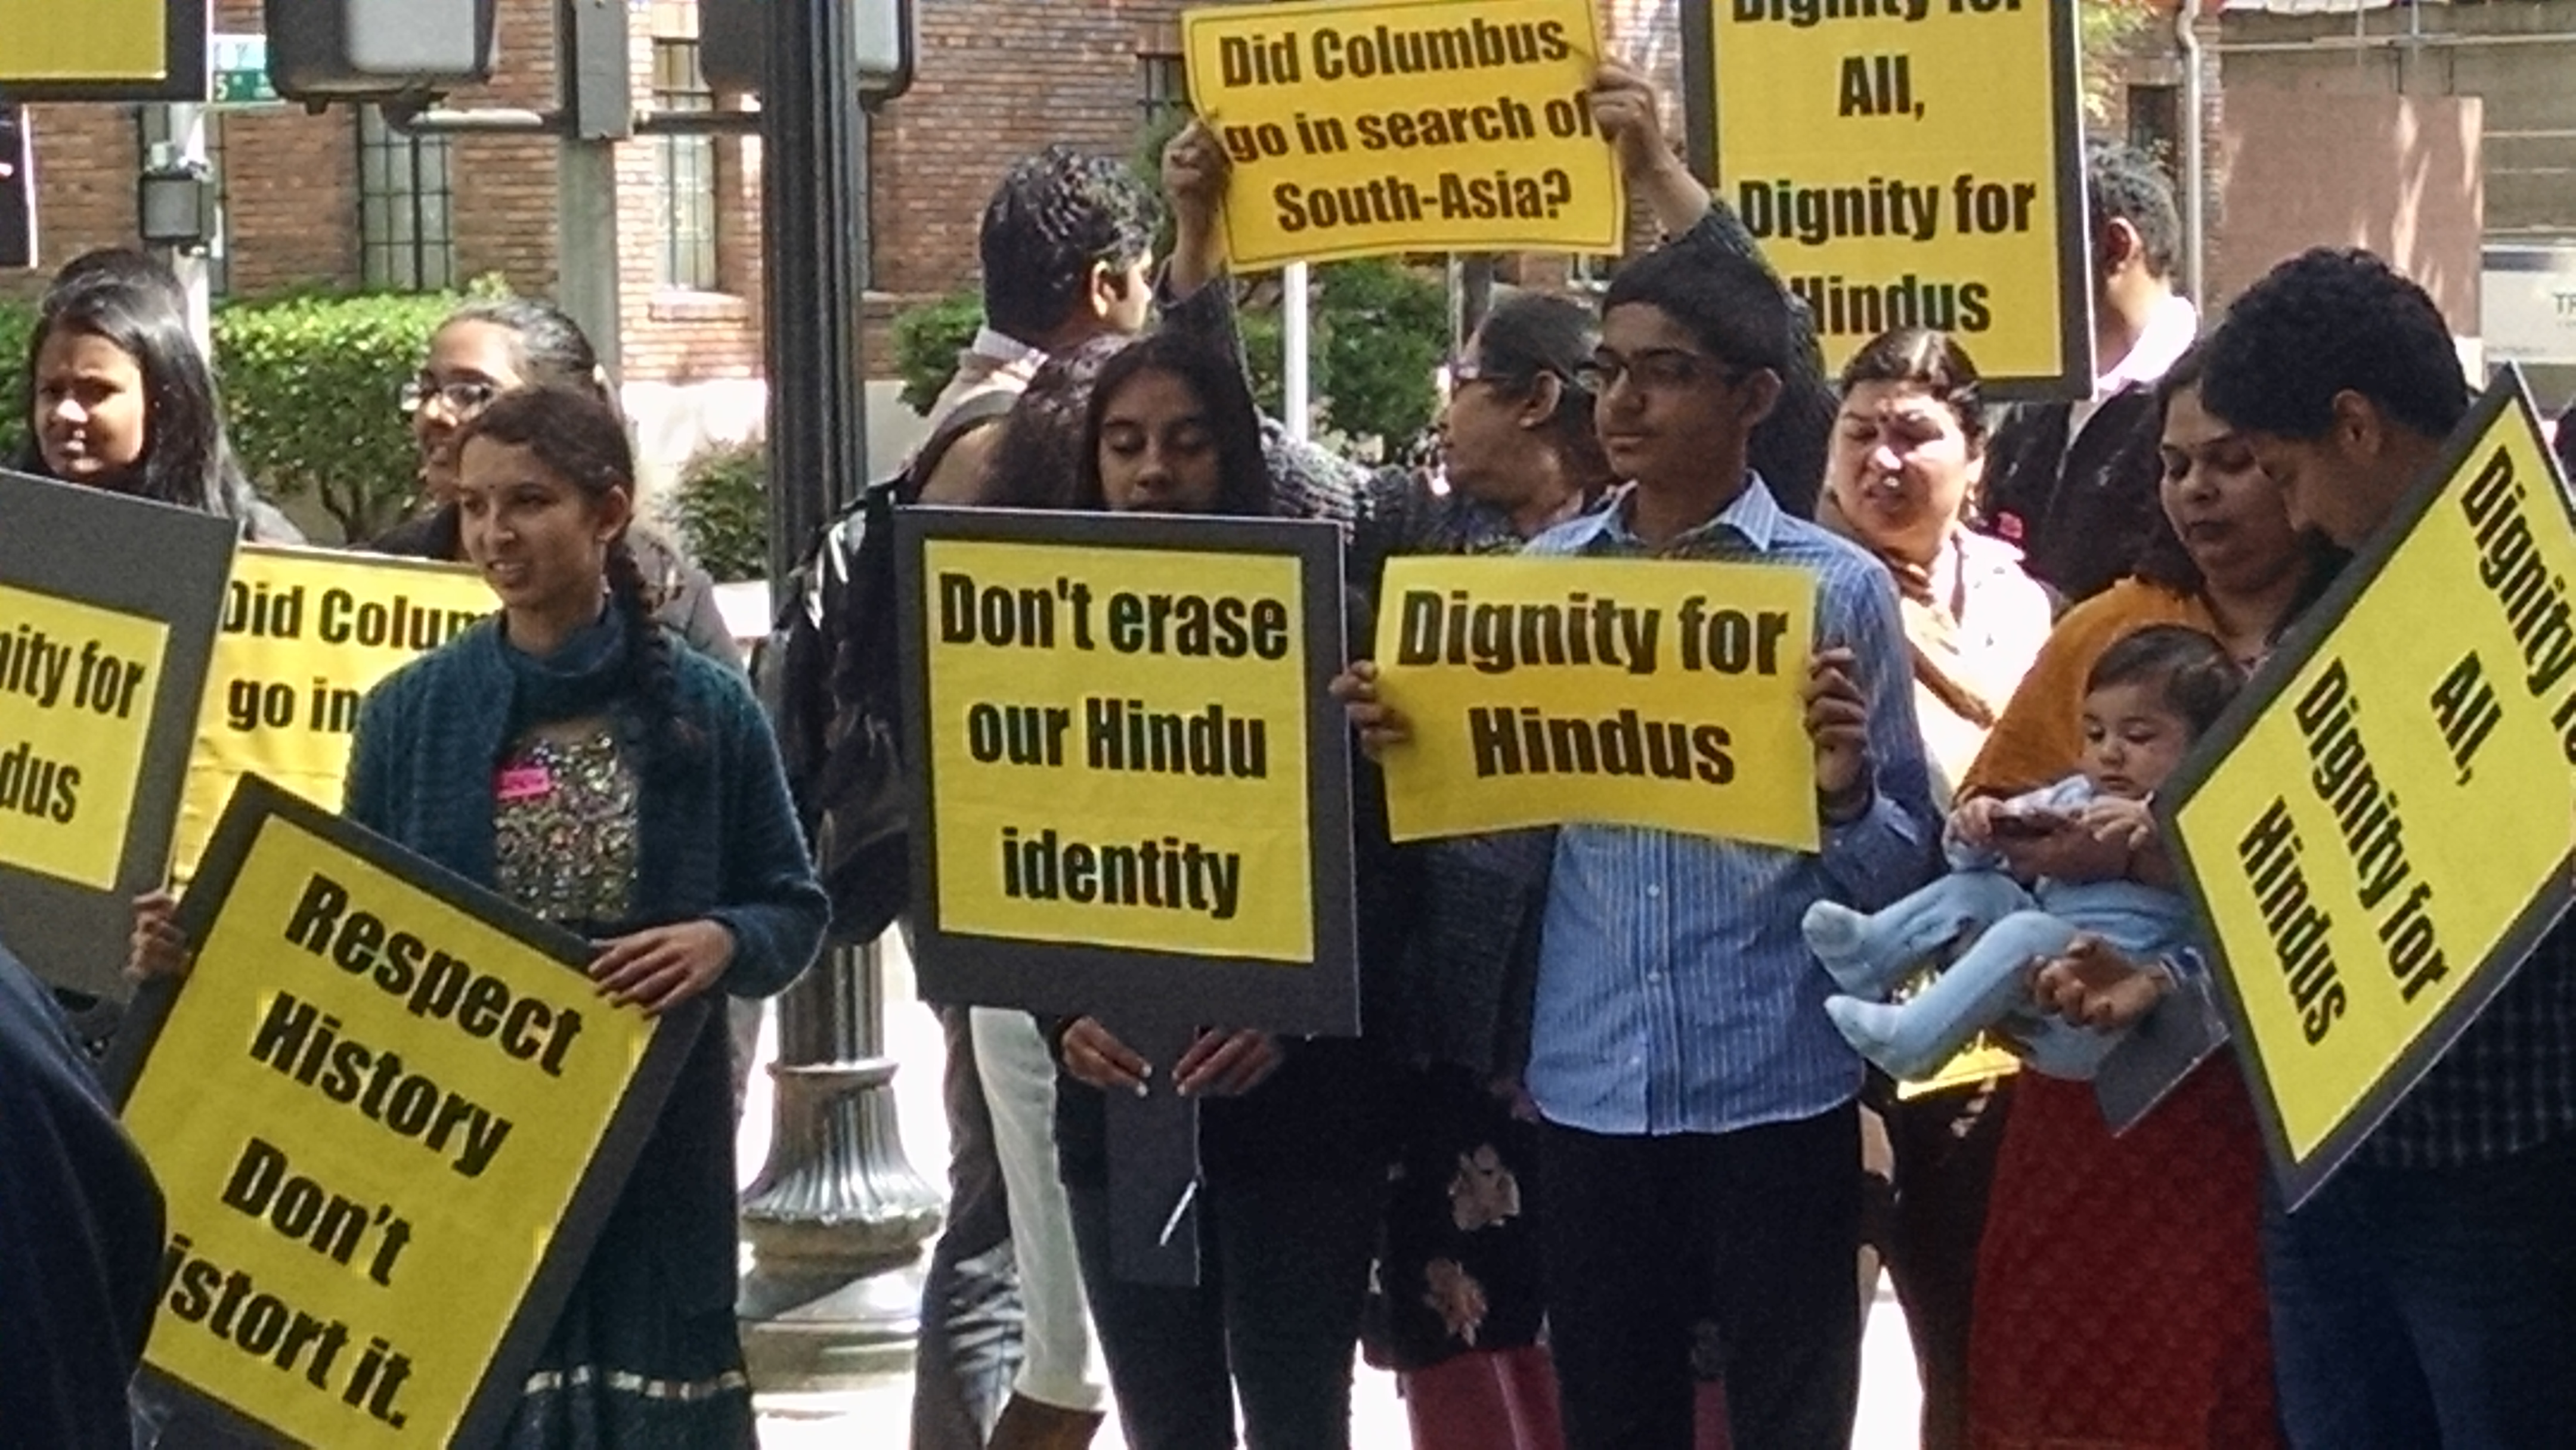 What can Account for Hinduphobia in the West?